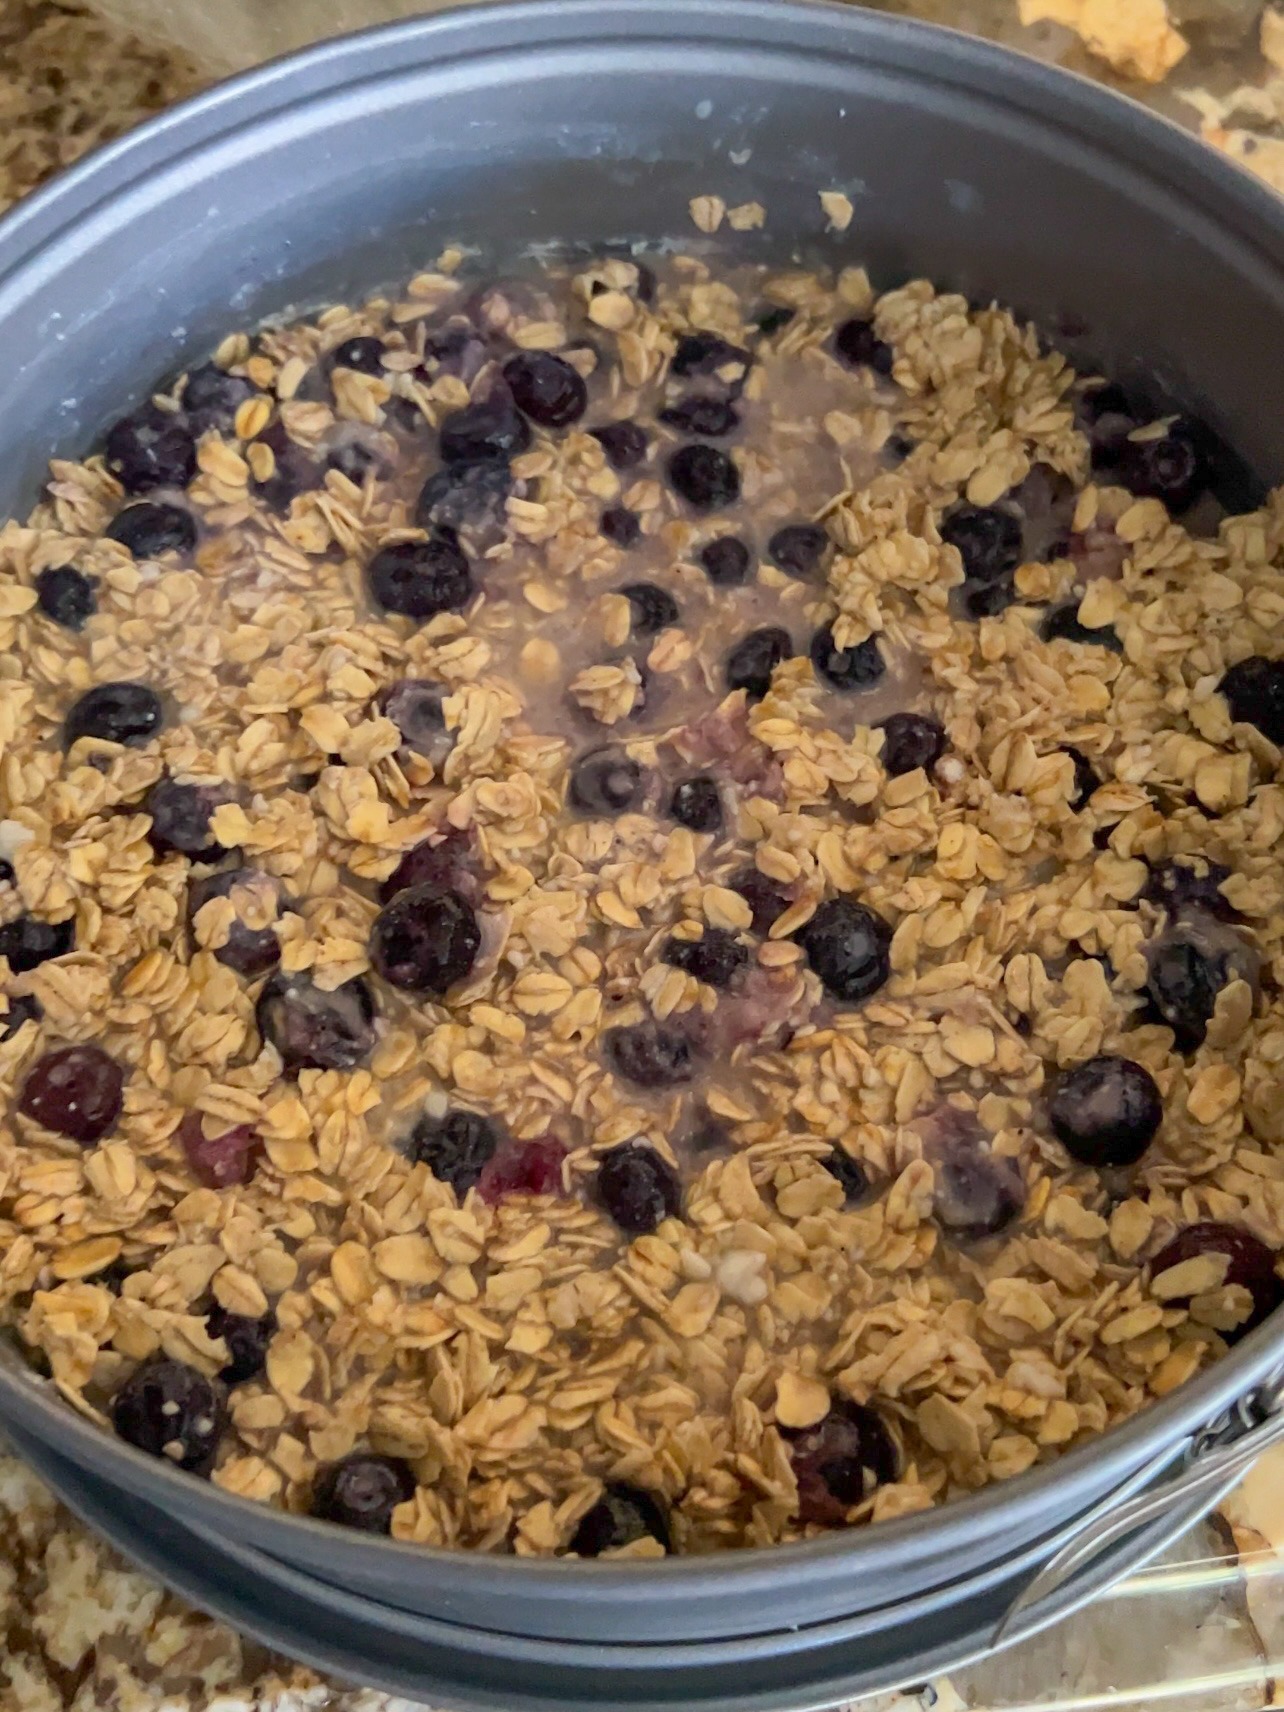 Adding blueberry and oat mixture to a pan for baking.